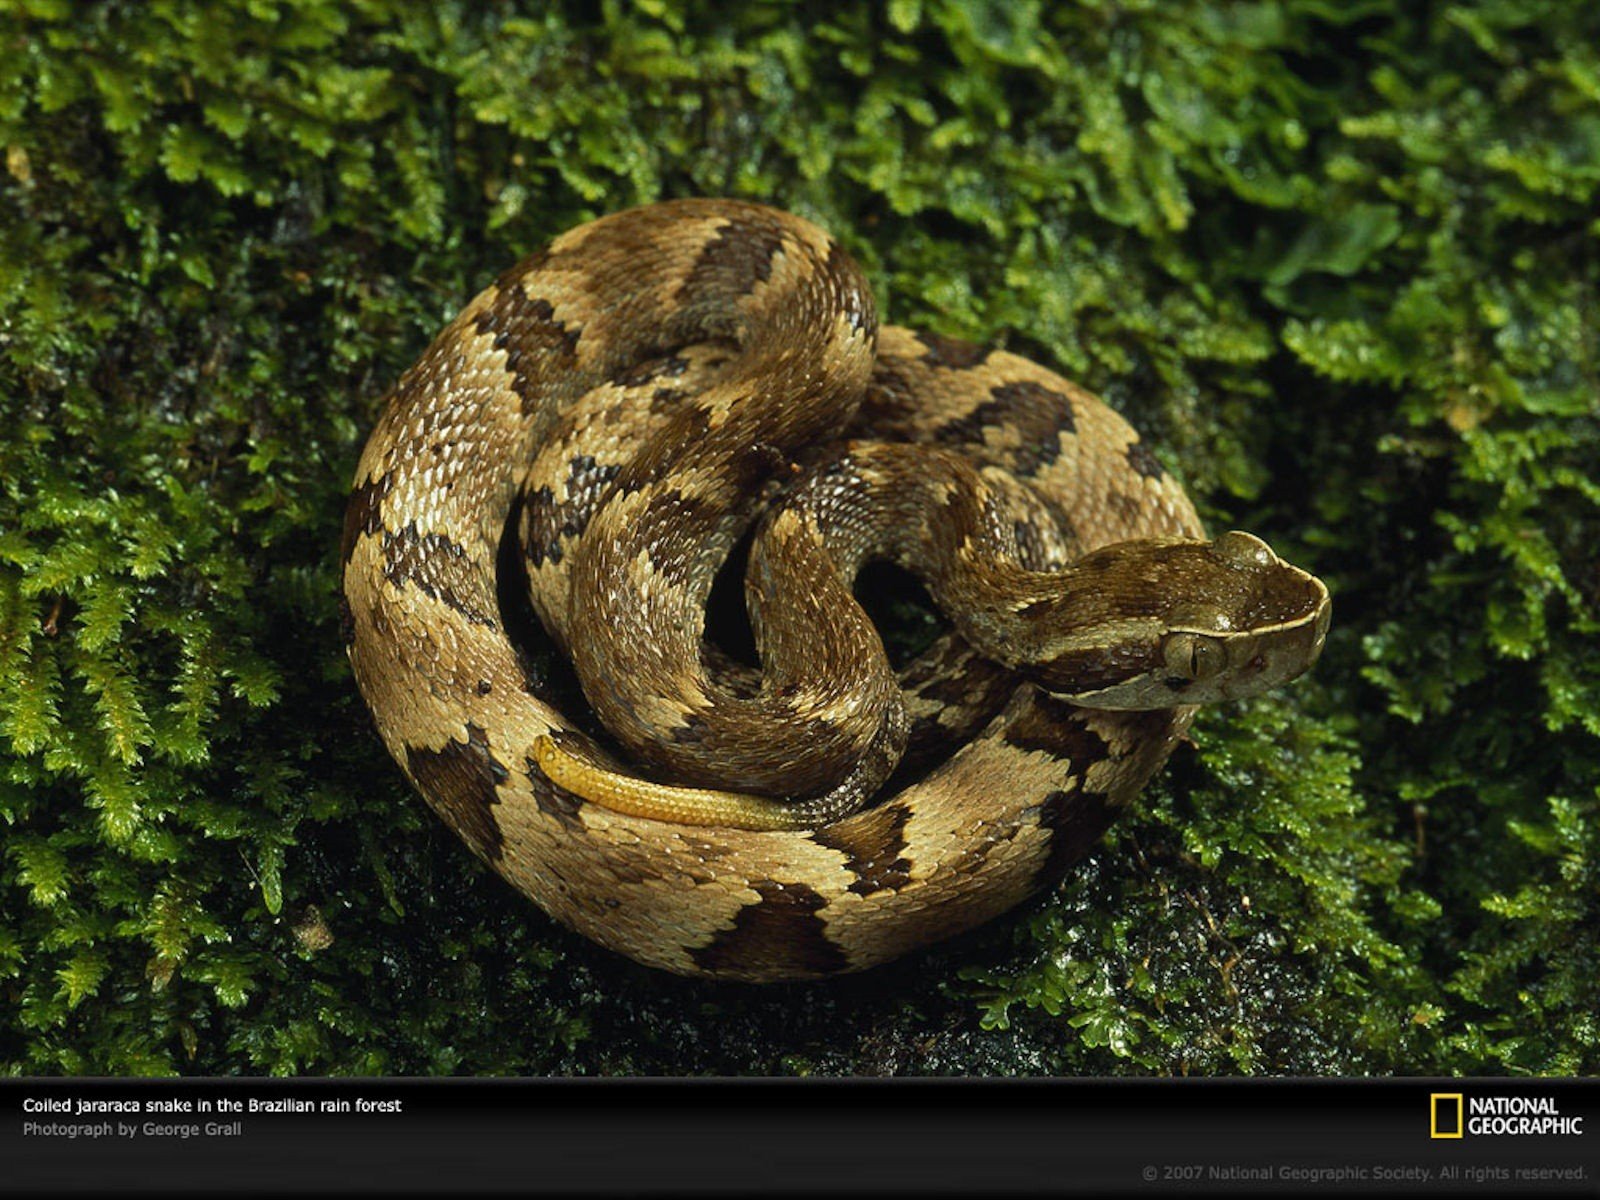 animals, Snakes, National, Geographic, Reptiles Wallpaper